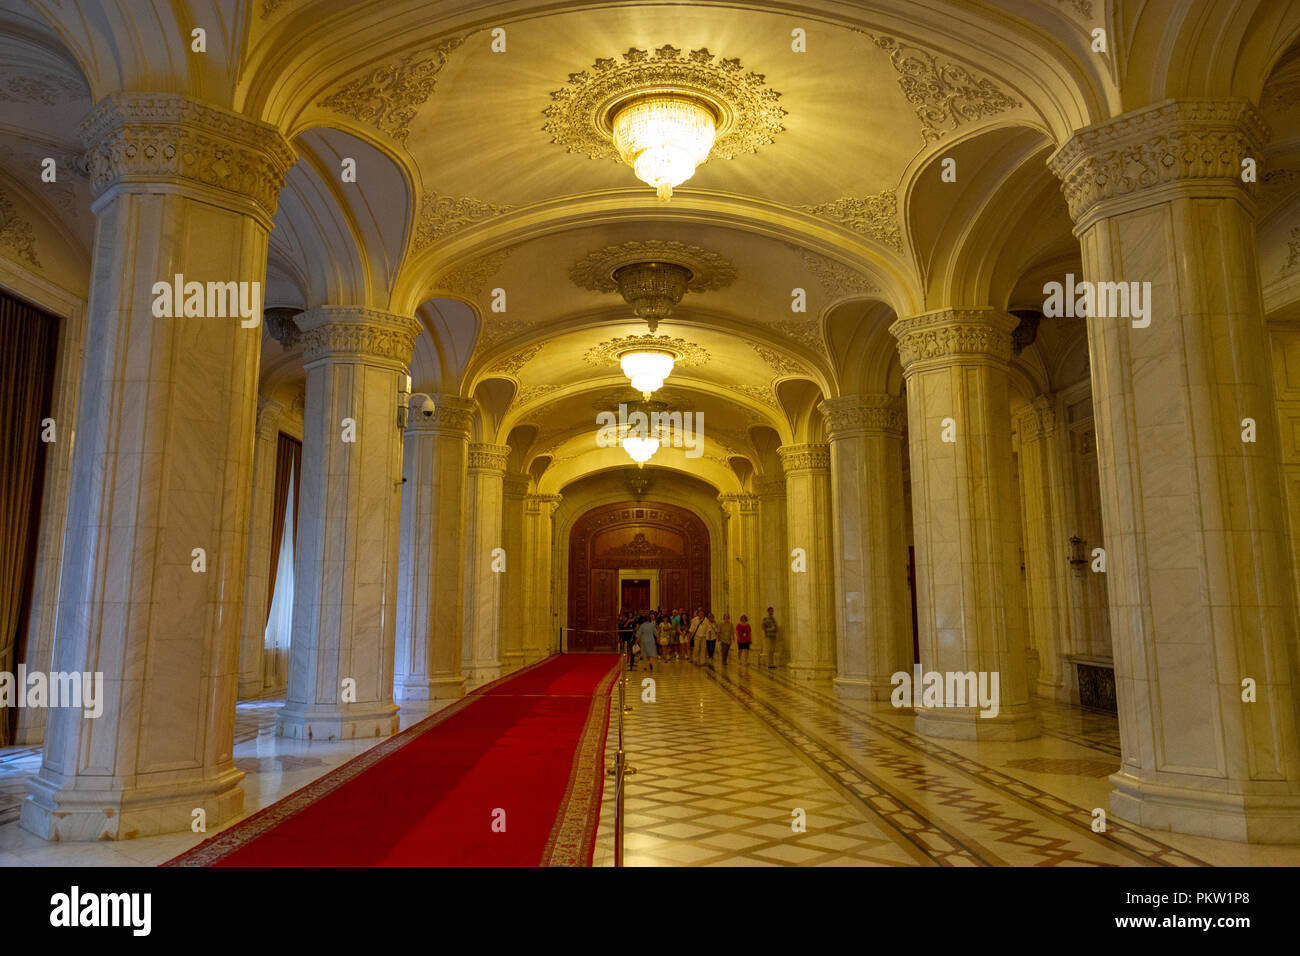 One of the many ornate corridors inside the Palace of the Parliament, House of the Republic, Bucharest, Romania. Stock Photo